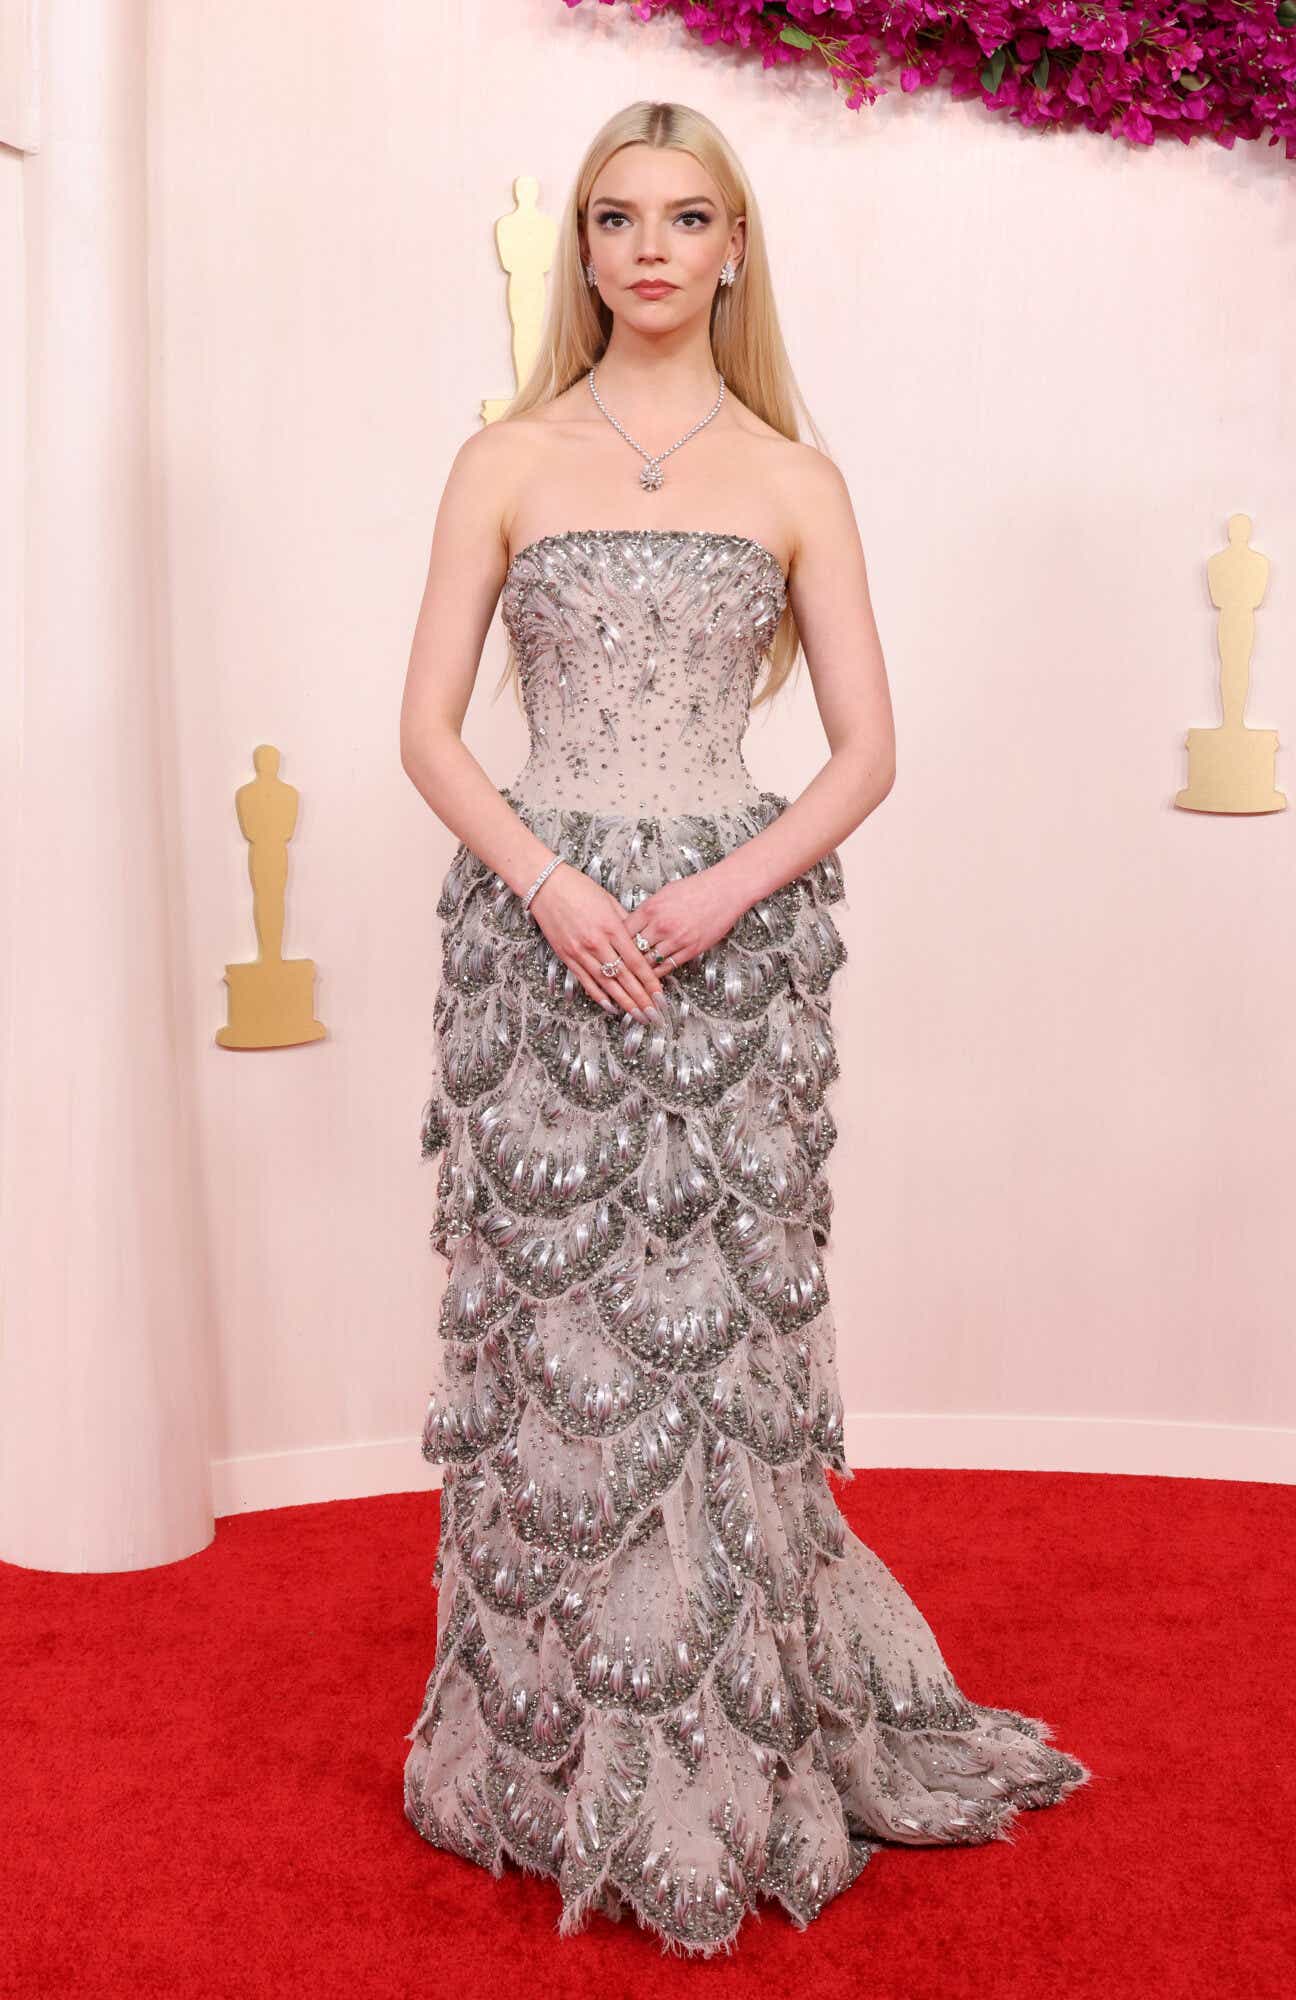 Anya Taylor-Joy on the Oscars red carpet wearing a 1920's inspired gown that has a beaded bodice and a bejeweled petal skirt.